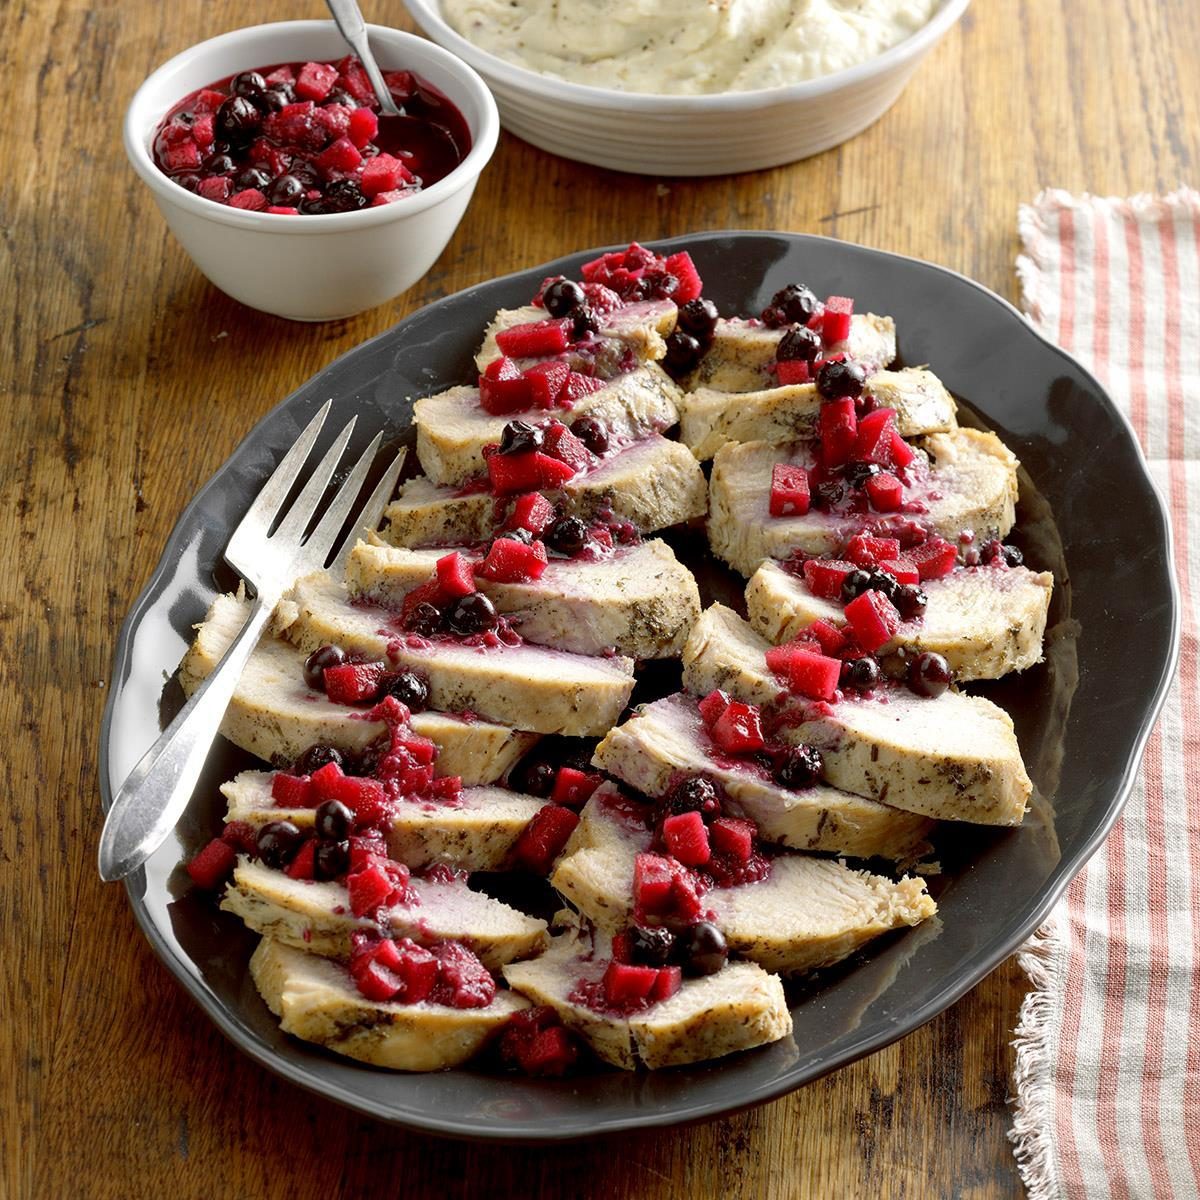 Pressure Cooker Turkey With Berry Compote Exps Thca19 207878 B08 16 4b